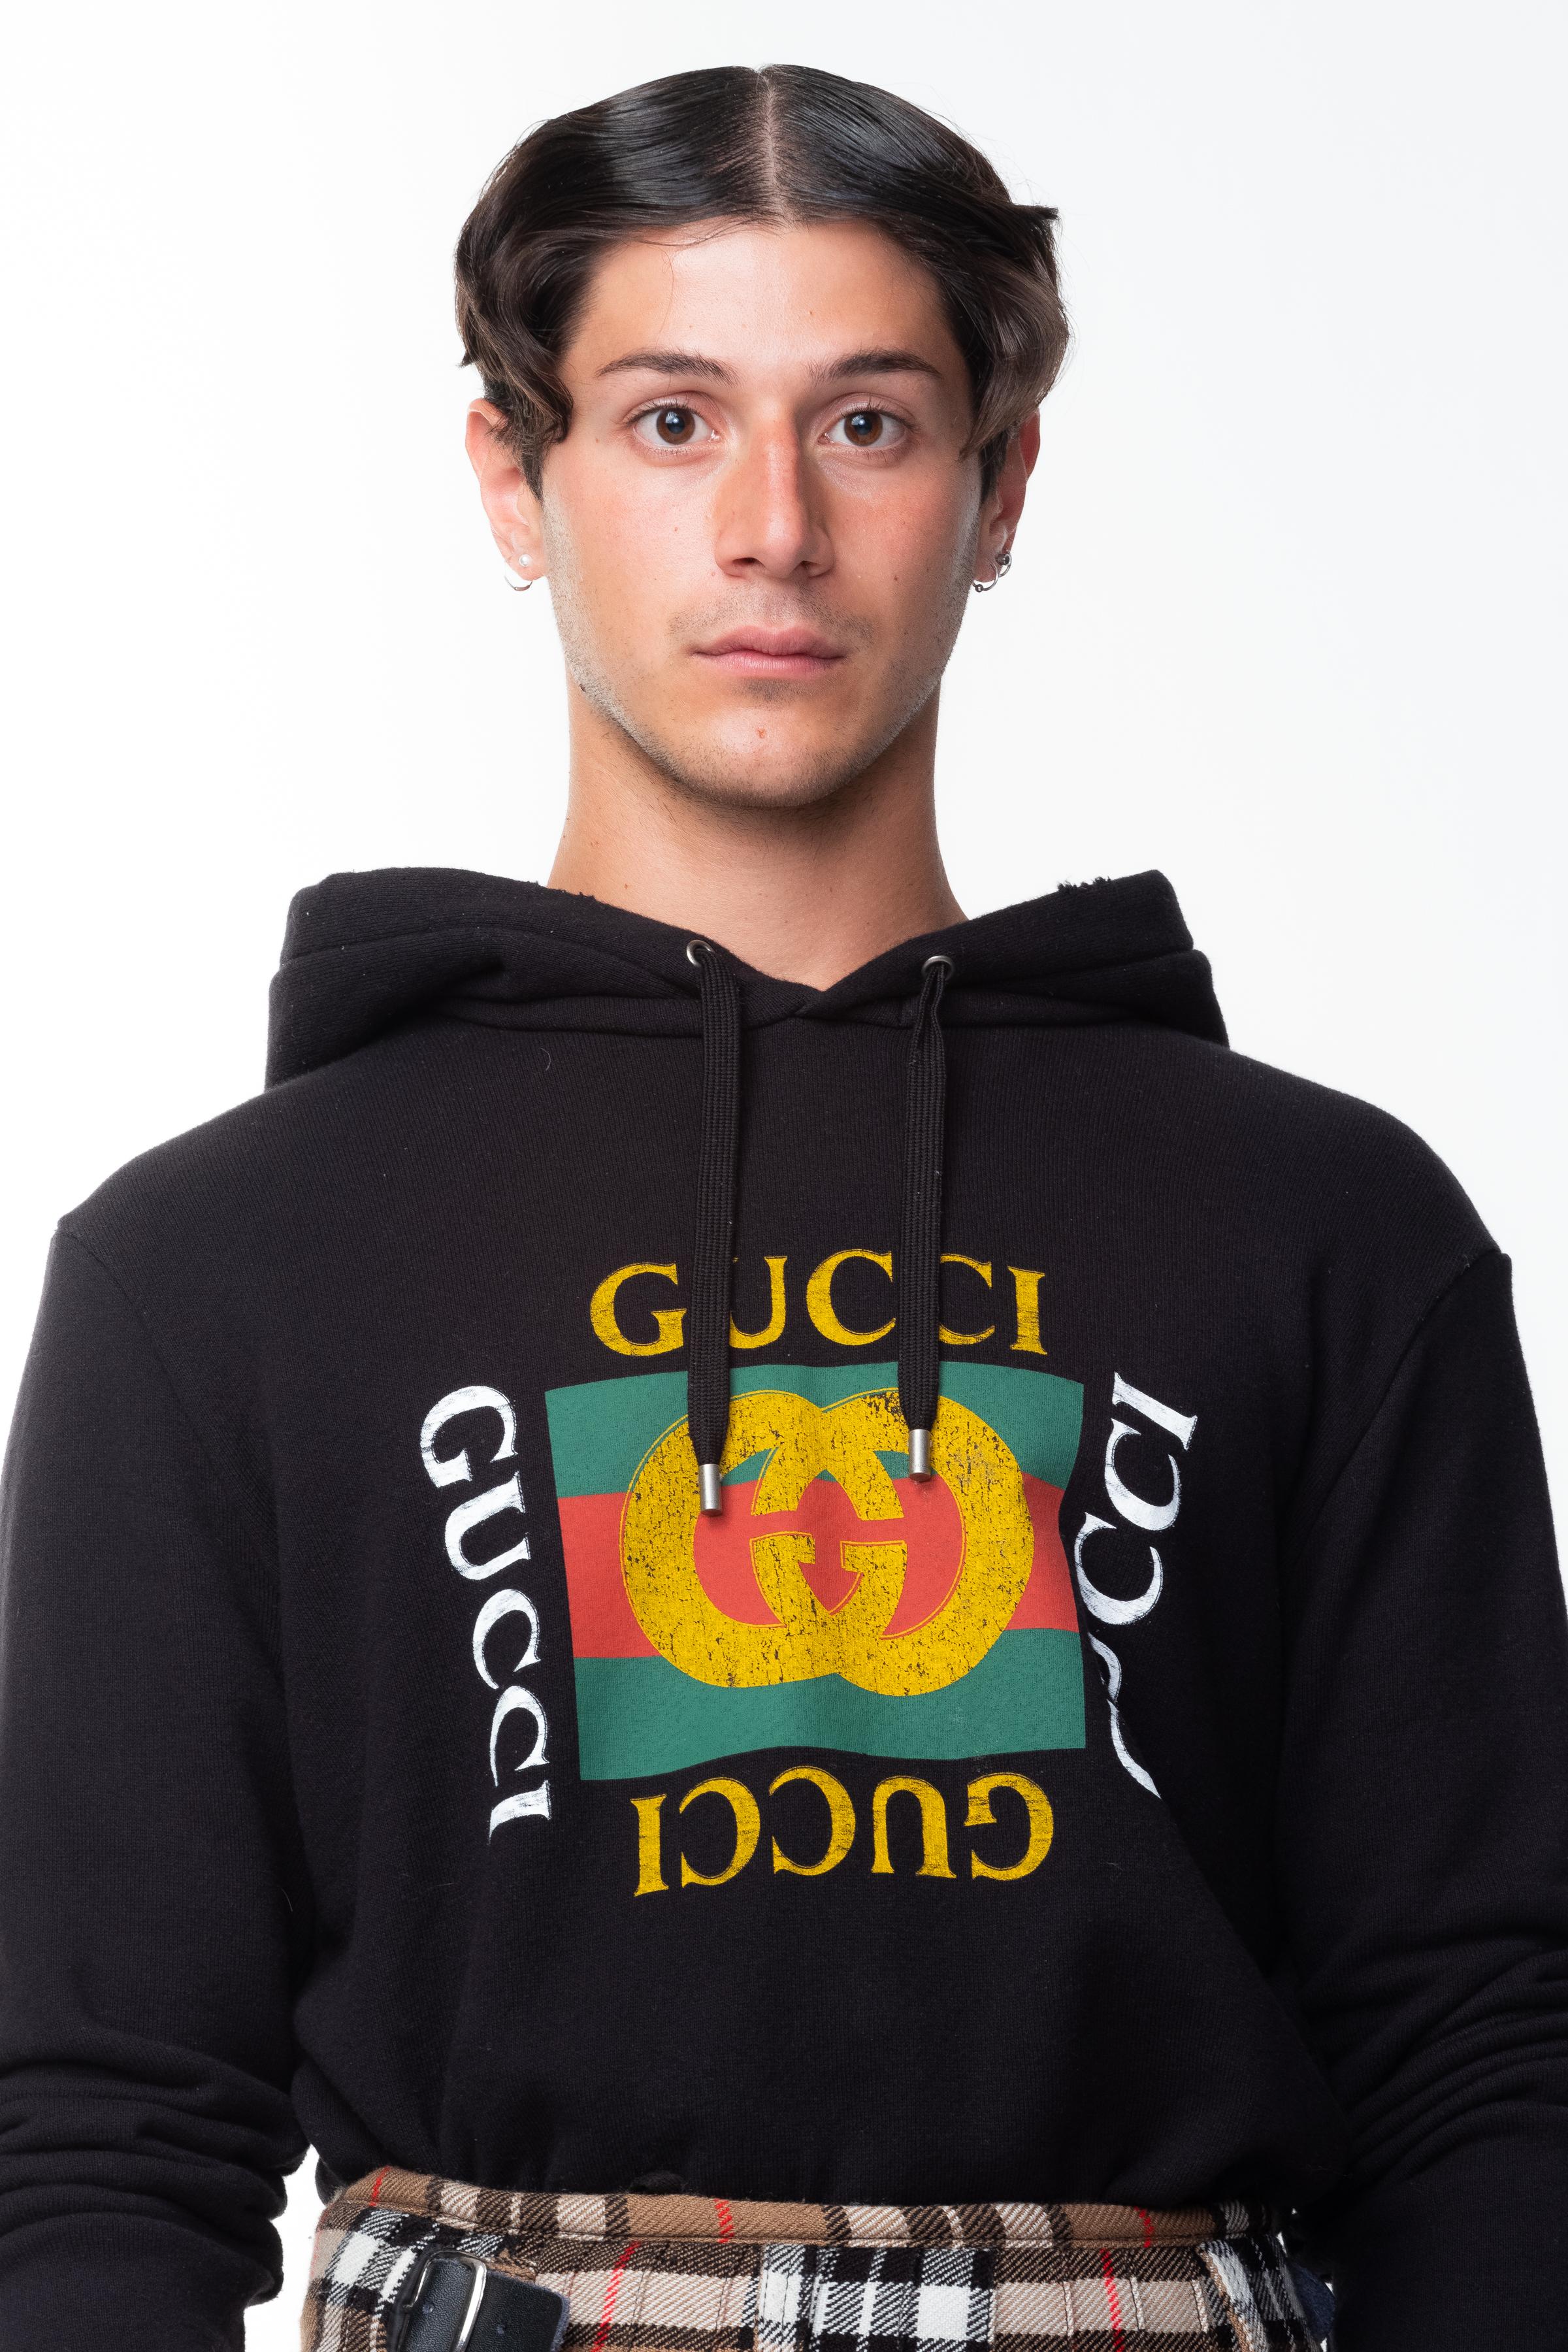 Gucci Oversize Logo Sweatshirt, vintage style oversized sweatshirt with washed fabric detail and worn out look, vintage graphic logo on the front. 

COLOR: Black with gold logo, white, green and red accents. 
MATERIAL: 100% cotton.
ITEM CODE: